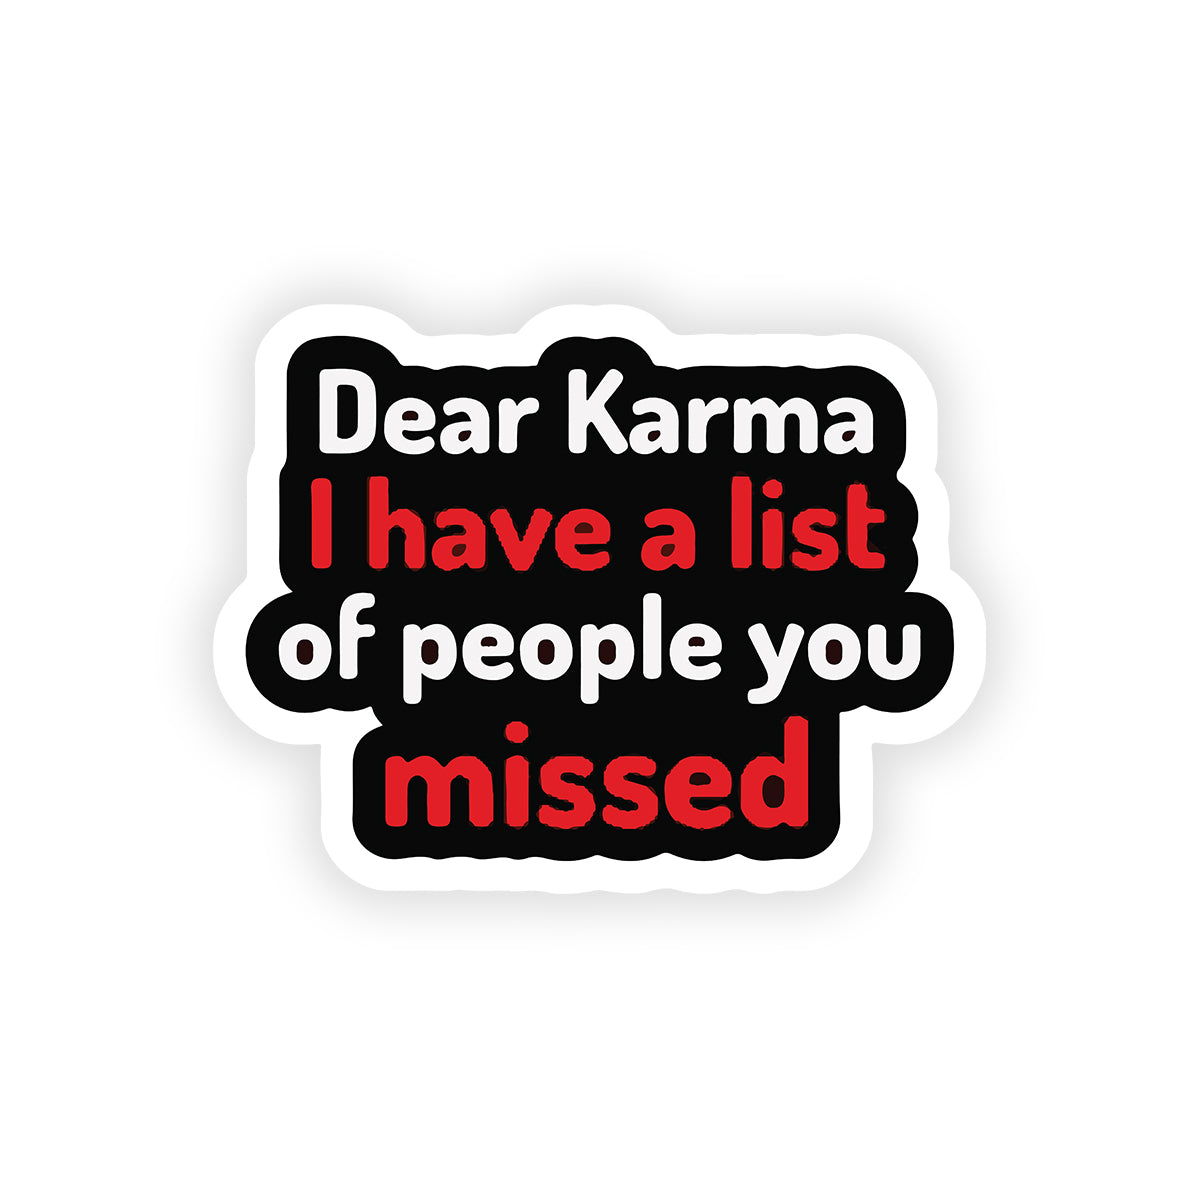 Dear karma i have a list of people you missed